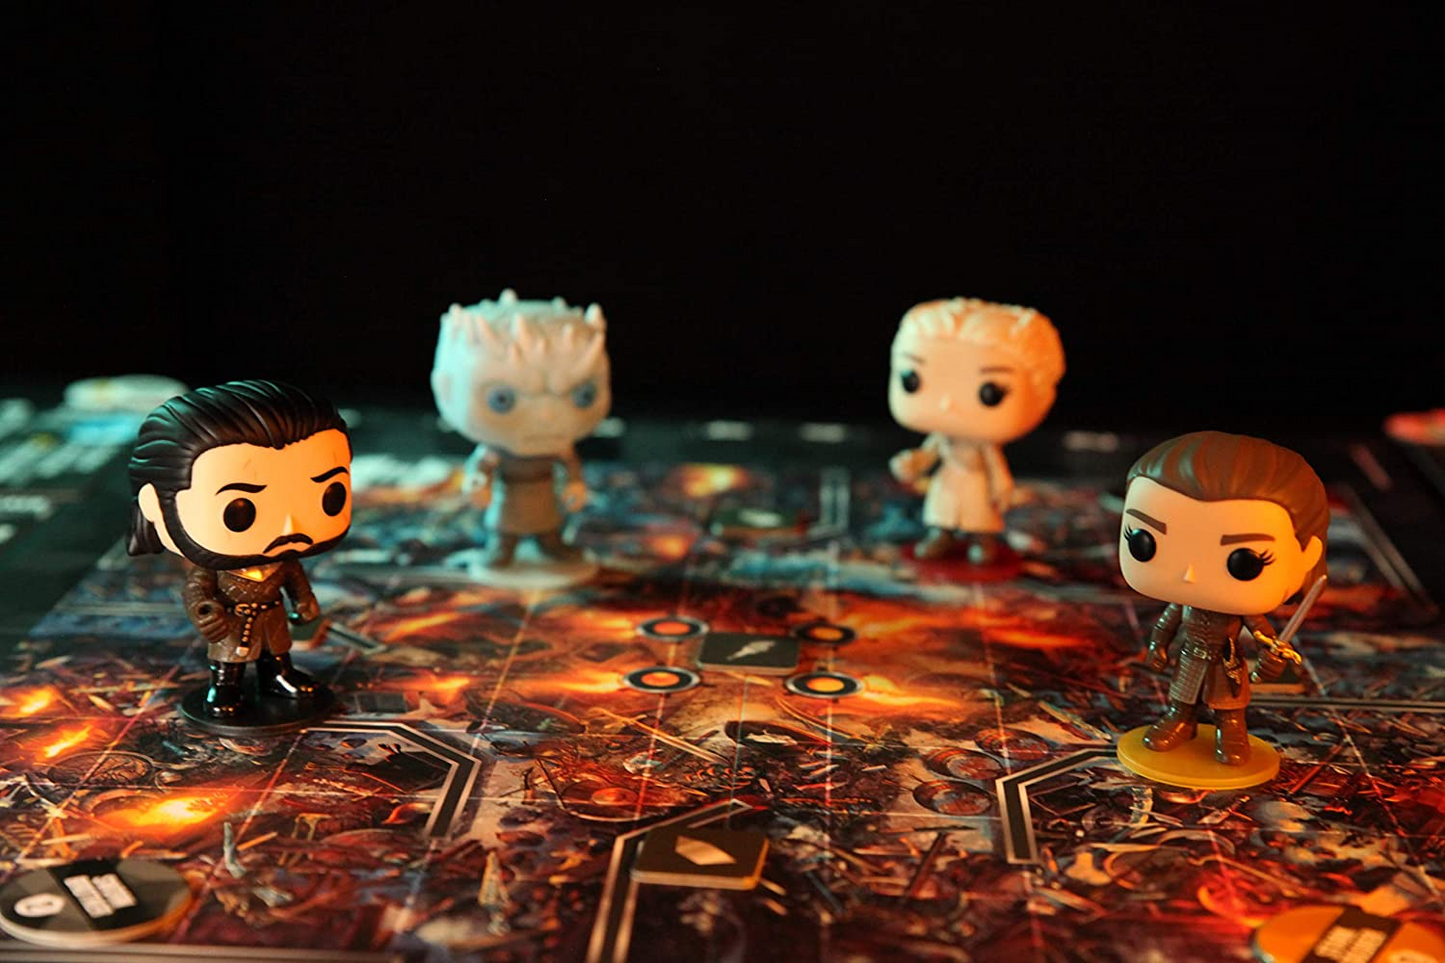 GAME OF THRONES FUNKOVERSE STRATEGY GAME